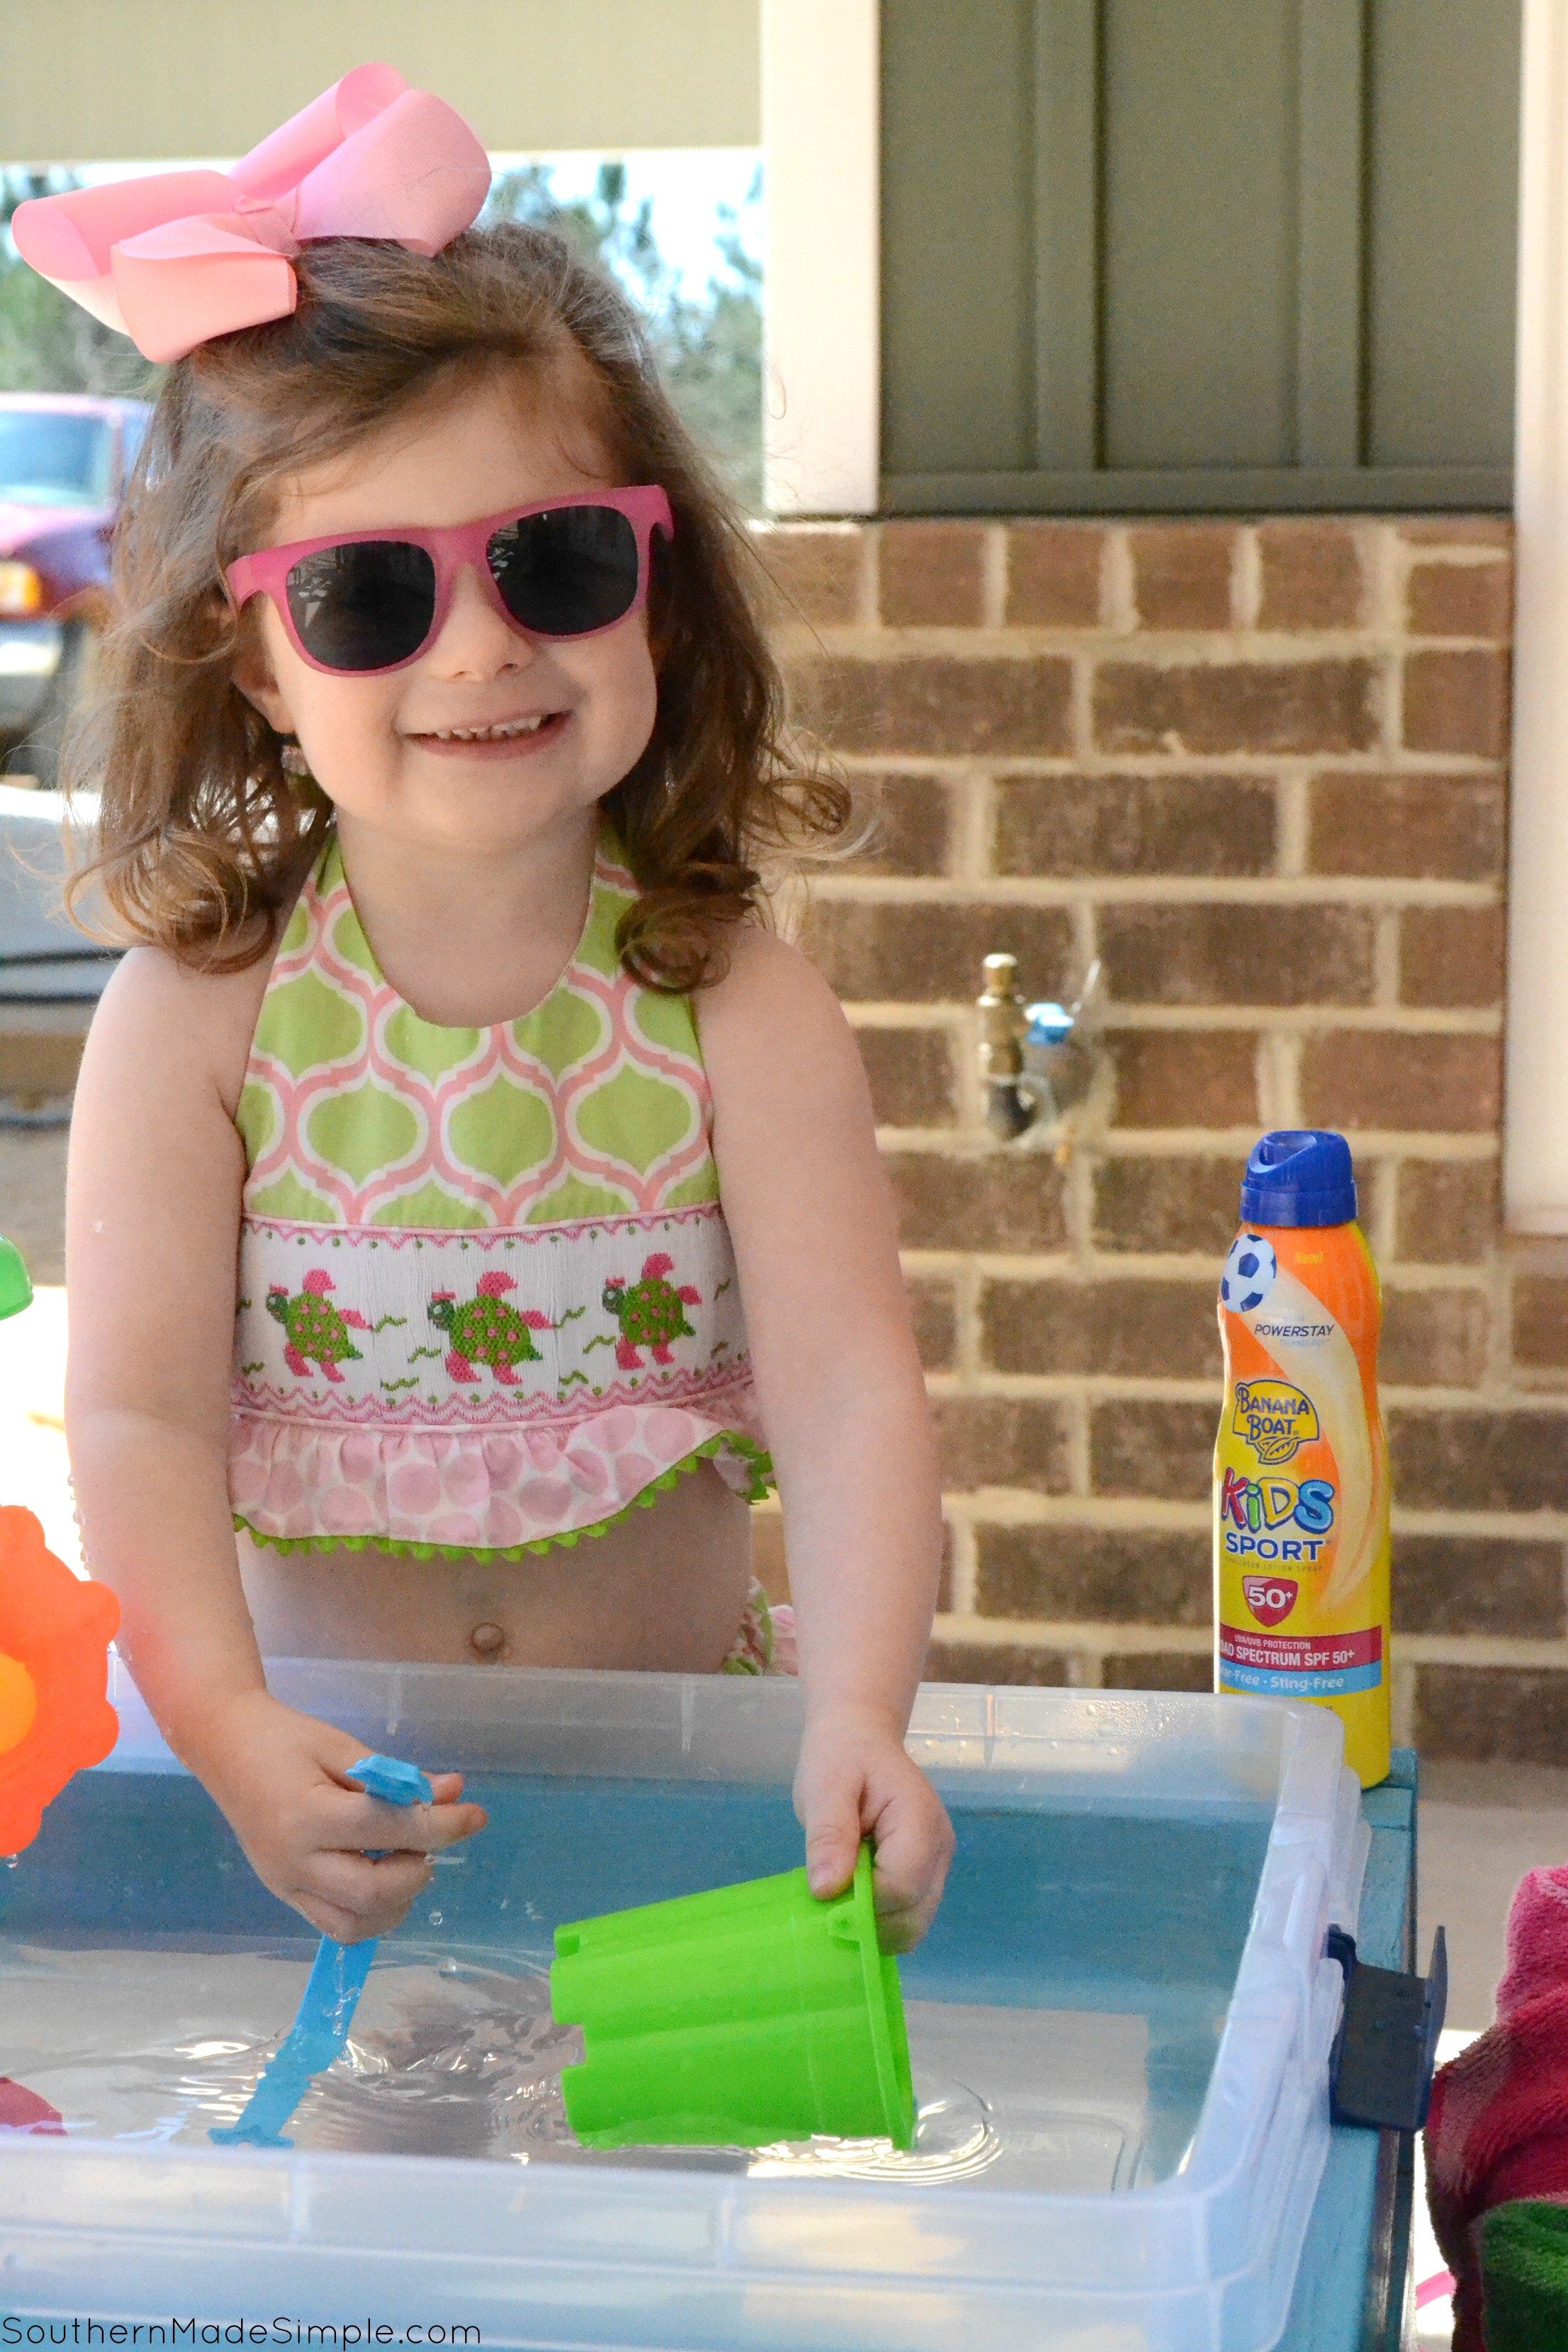 As the days start getting warmer, we're starting to get outside and enjoy the sunshine! This DIY Water Activity Table is a great way to keep little ones entertained, and it costs less than $30! Don't forget the• Banana Boat® Kids Sport Sunscreen Lotion Spray with PowerStay™ Technology so you can play outdoors even longer! #ad #BBRealFun